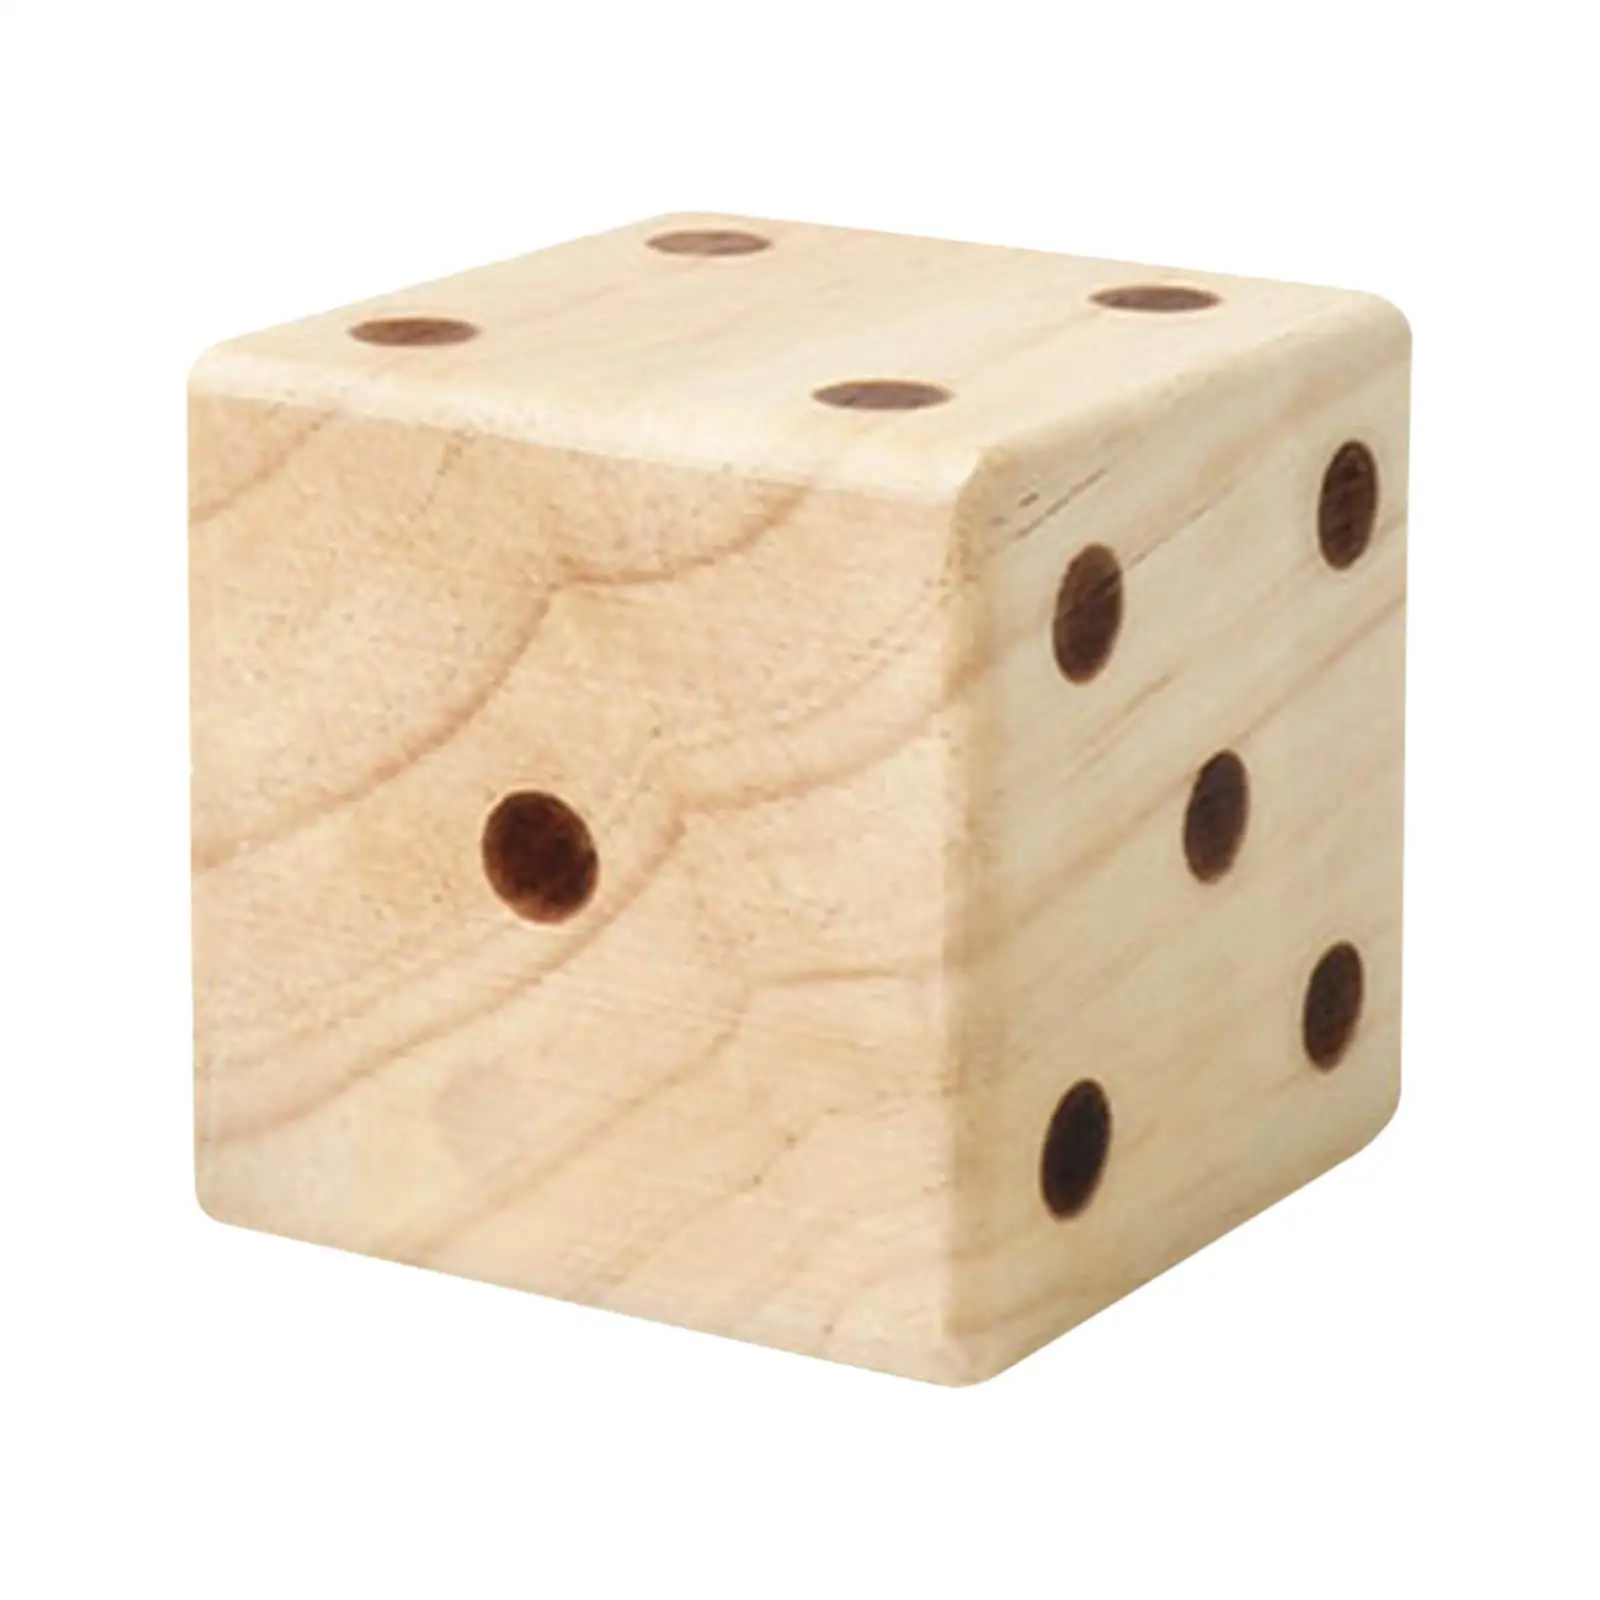 Giant Wooden Yard Dice 7cm/2.36inch Smooth Edge Lightweight Role Playing Dice for Outdoor Indoor Beach Kids Family Adults